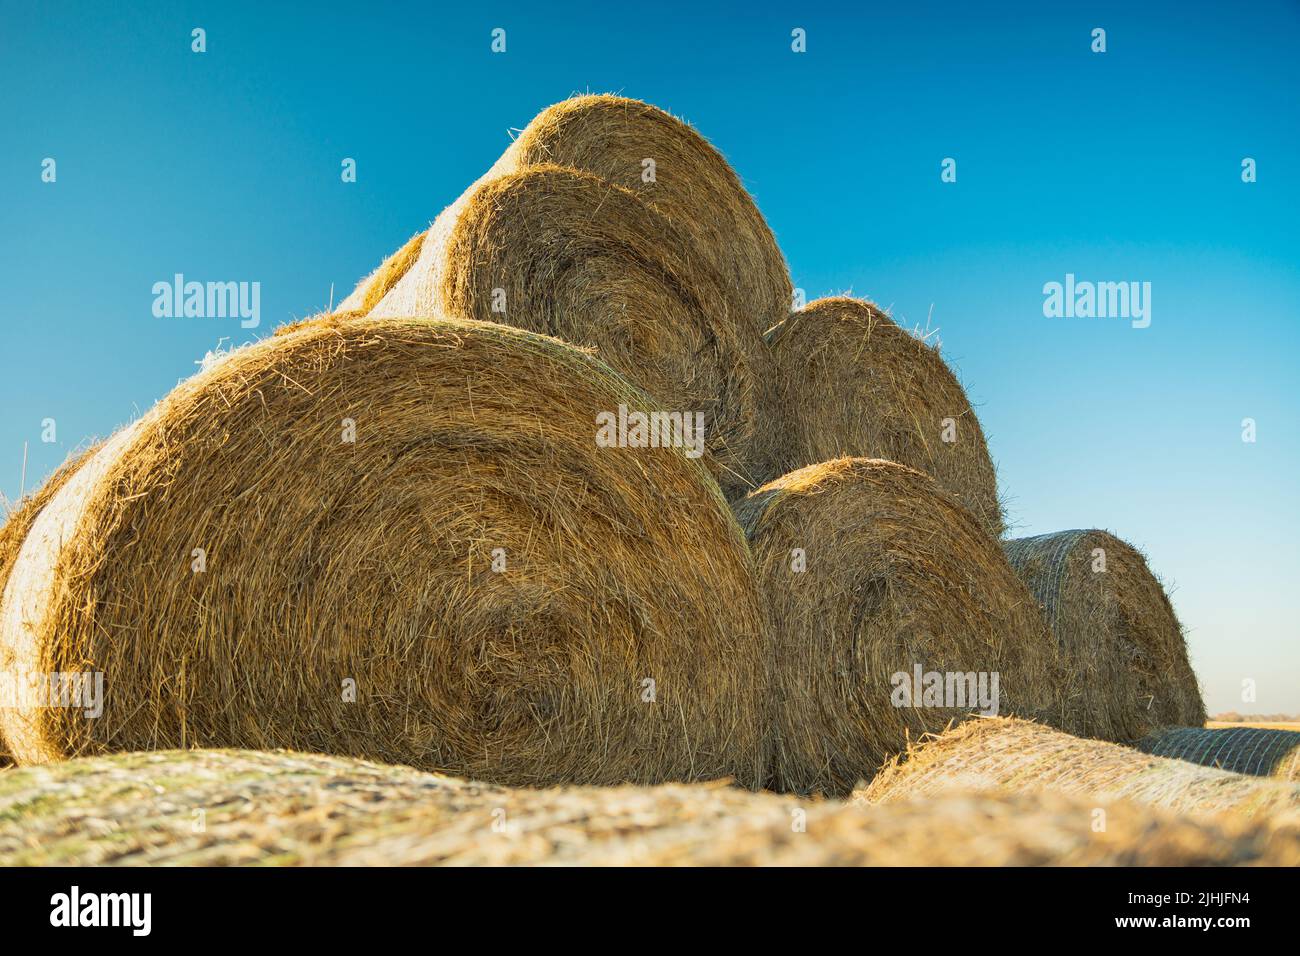 Pyramid of hay bales against the blue sky Stock Photo